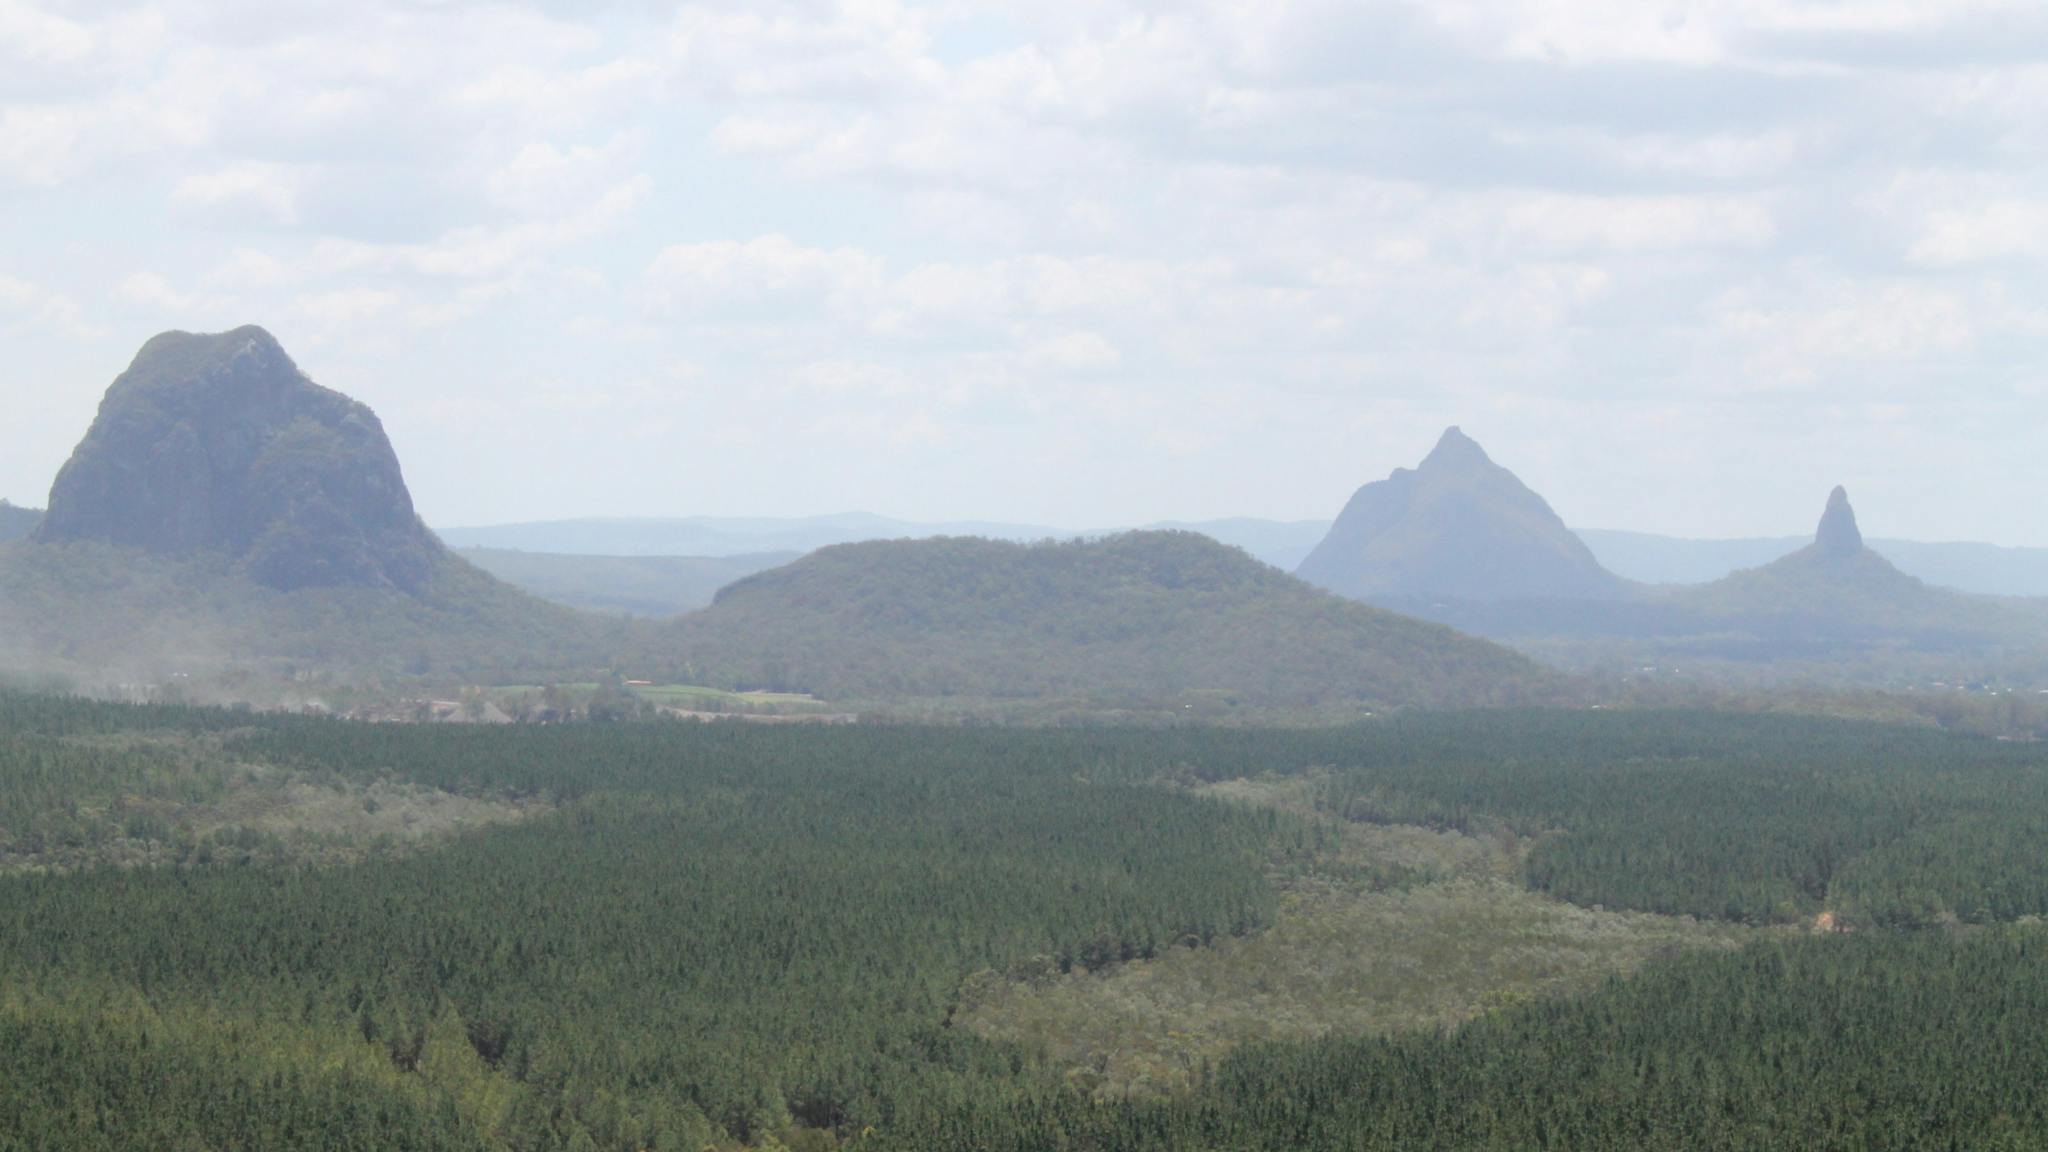 Glasshouse Mountains from Wild Horse Mountain Lookout Tower